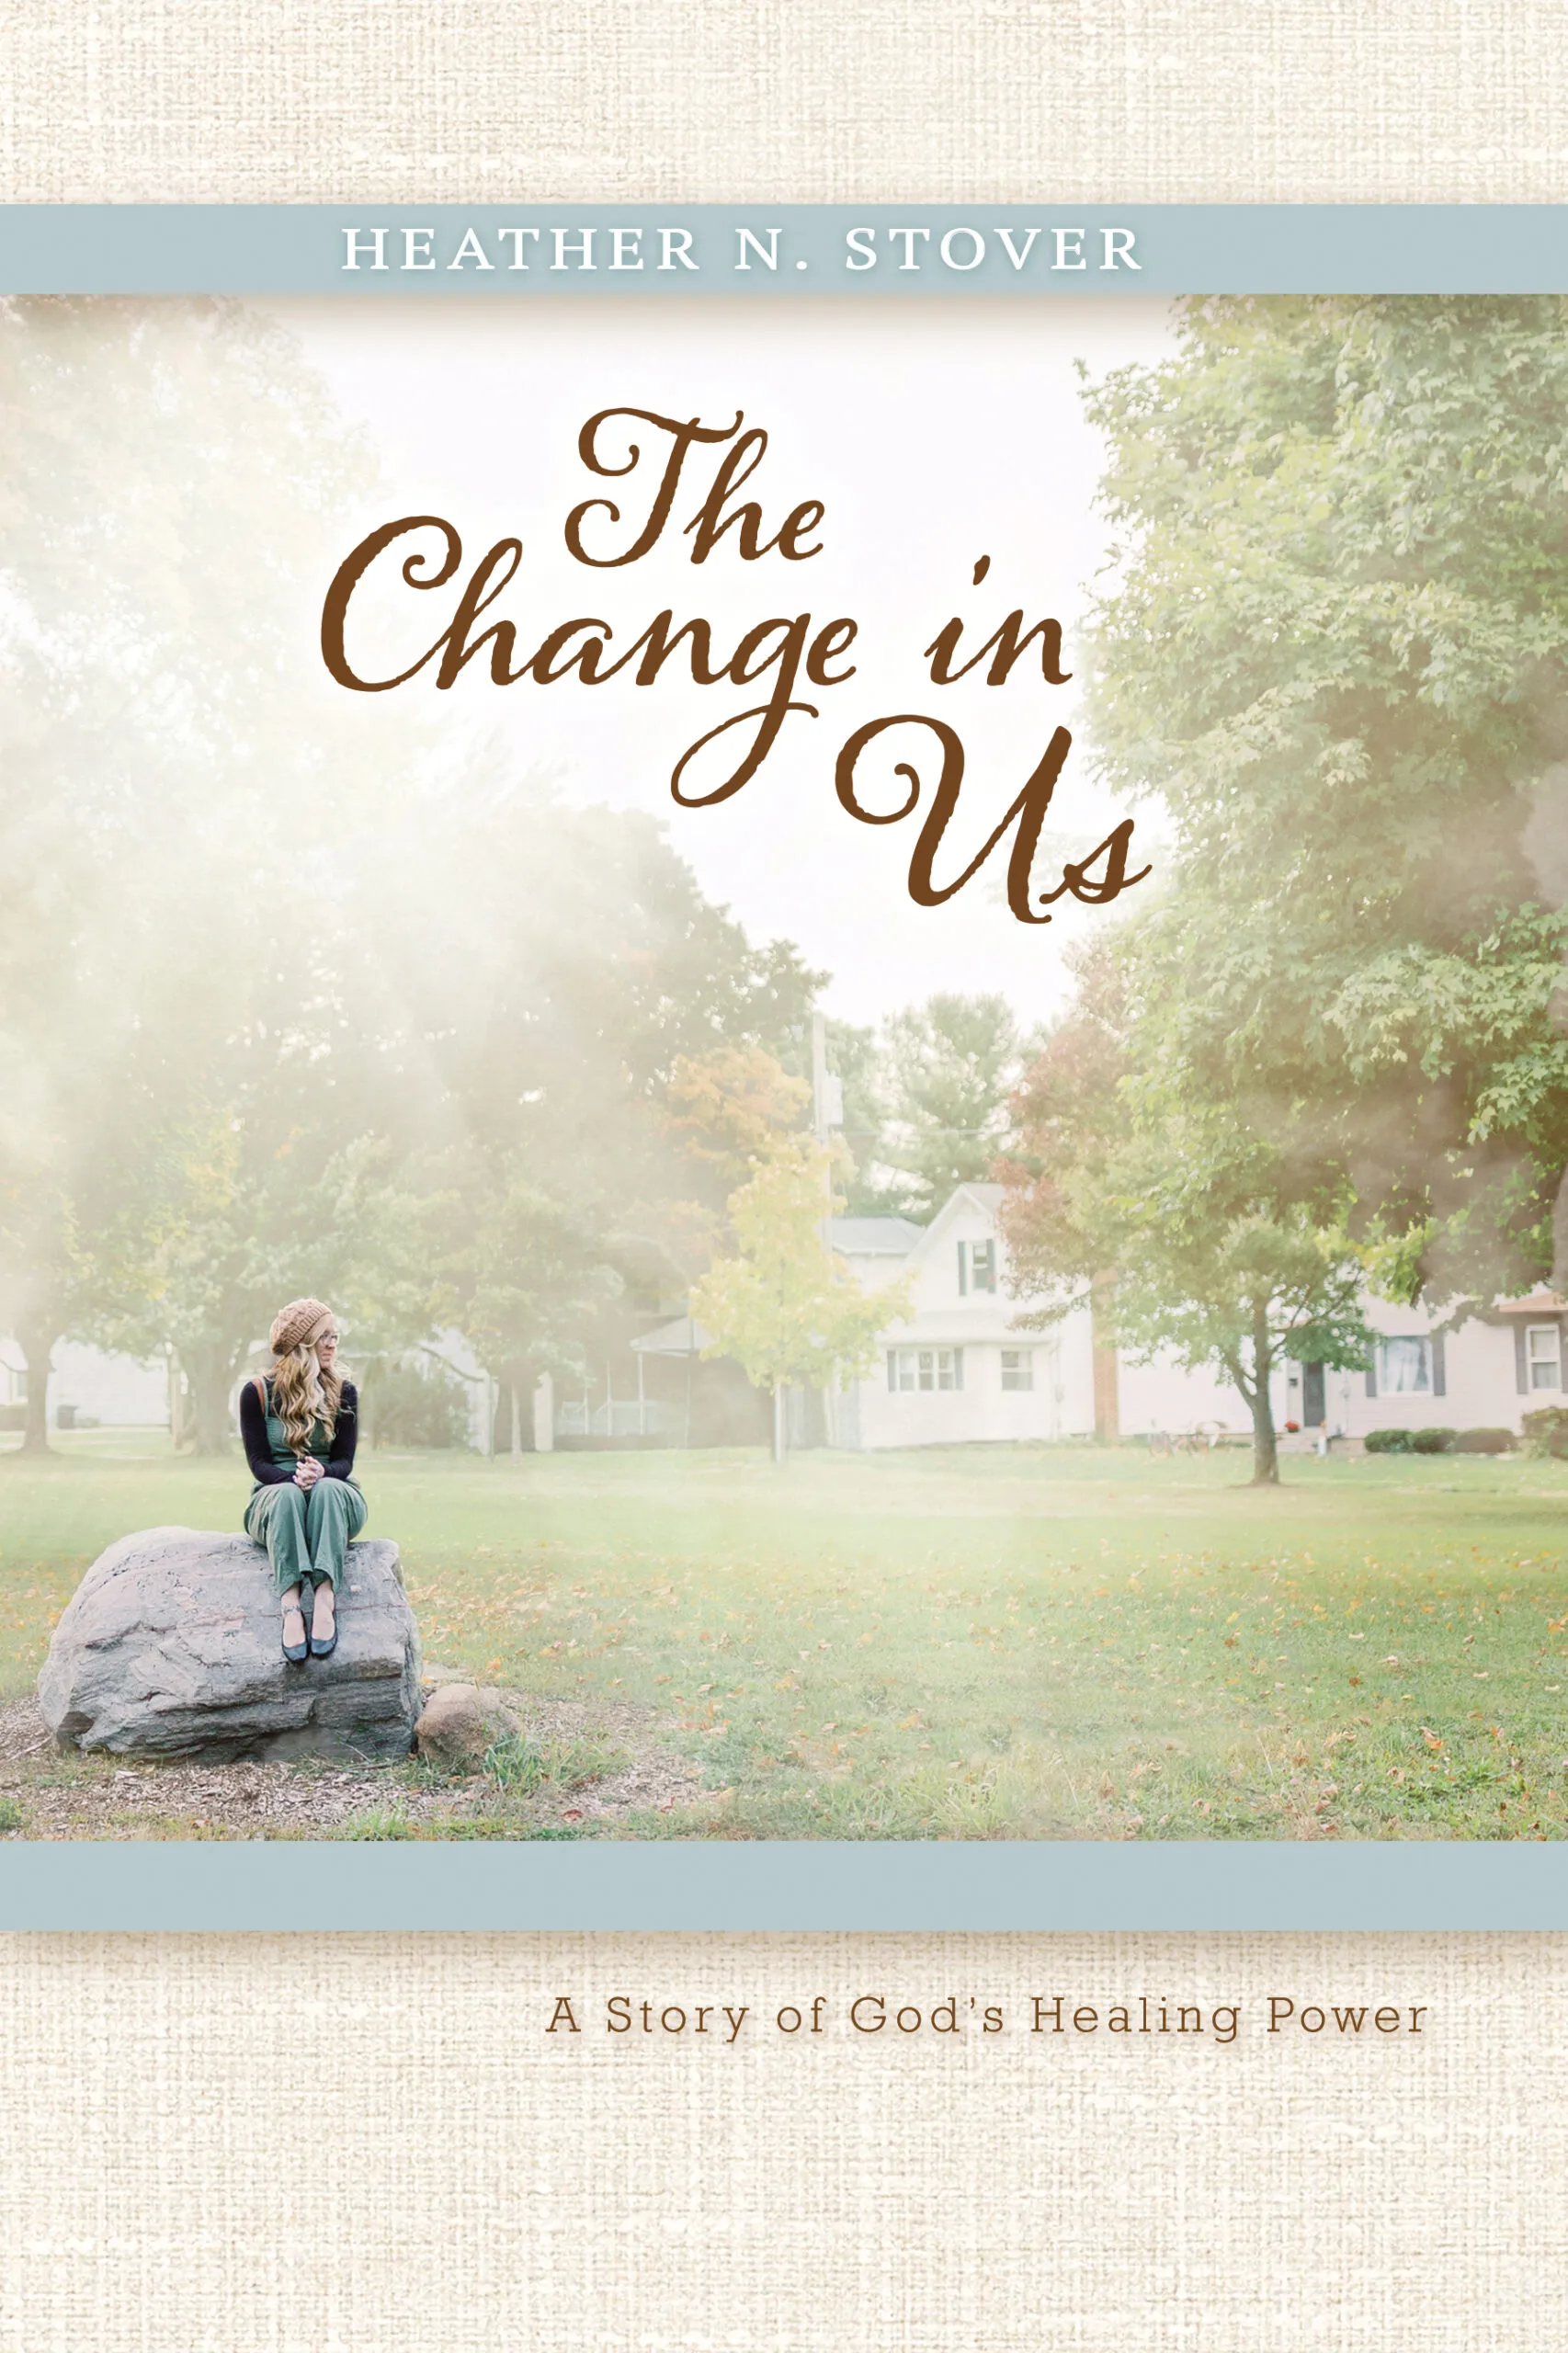 The Change in Us - A Story of God's Healing Power by Heather N. Stover